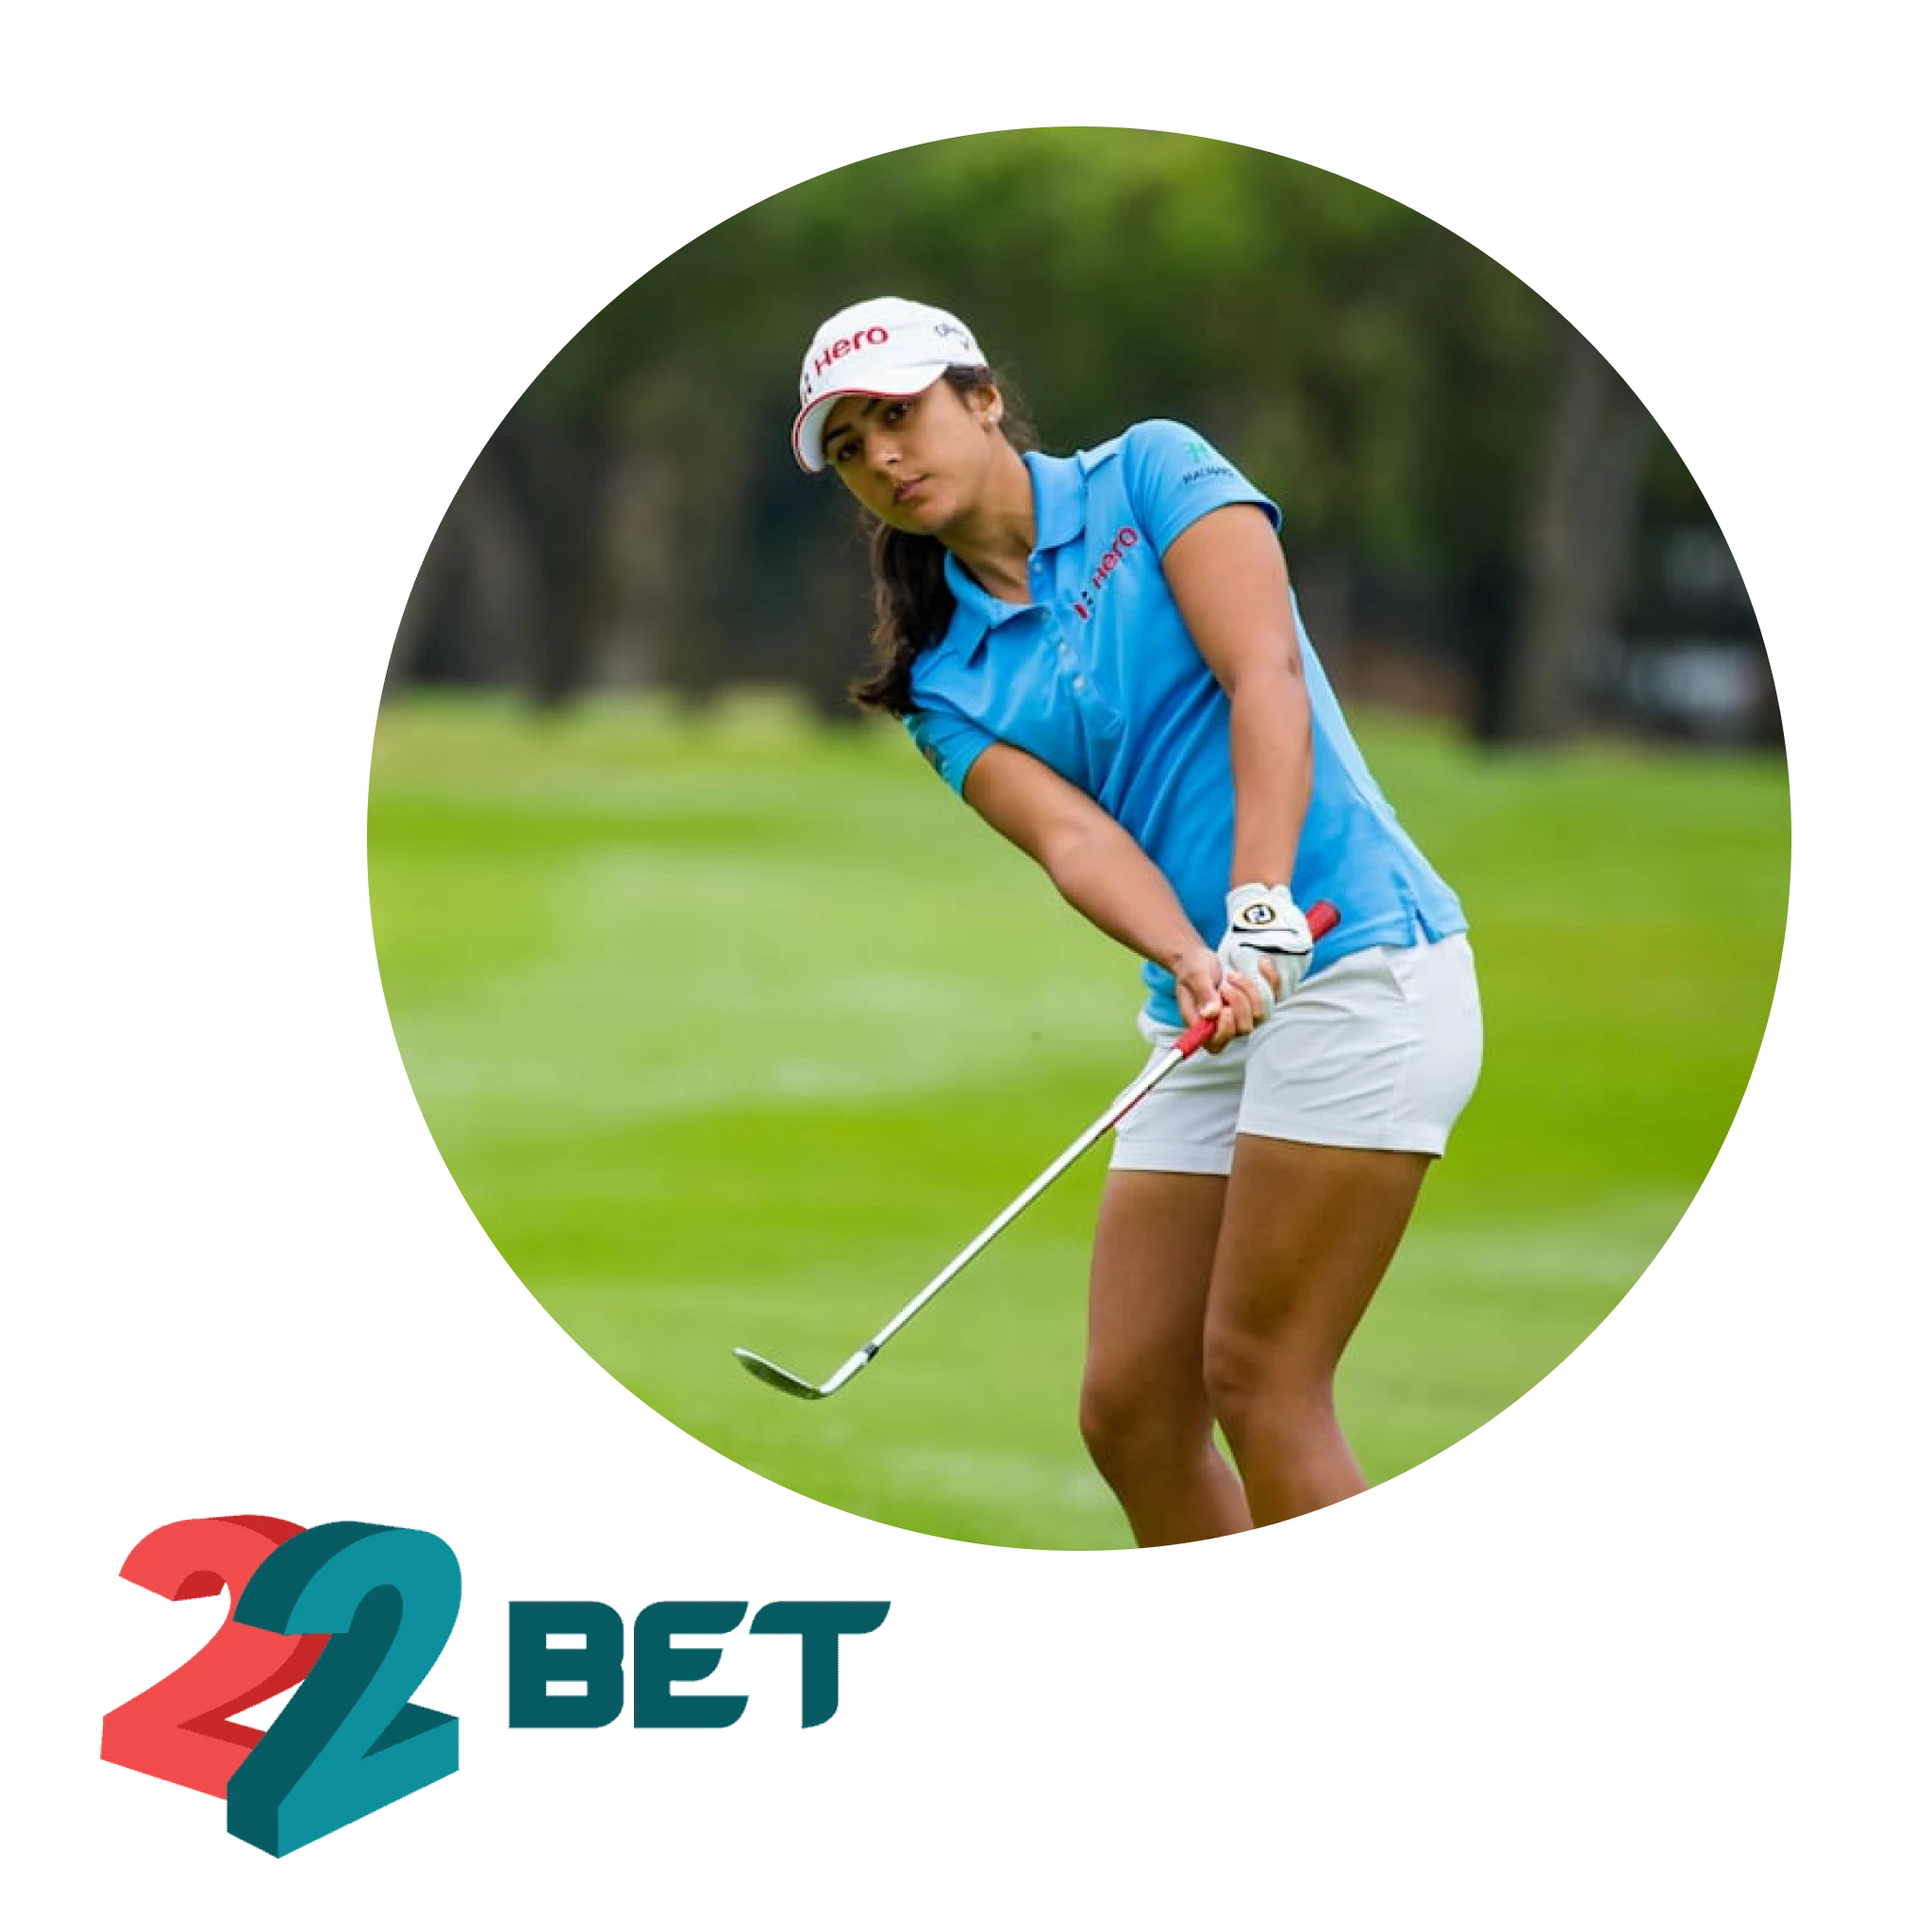 22bet proposes various tools for golf bets.